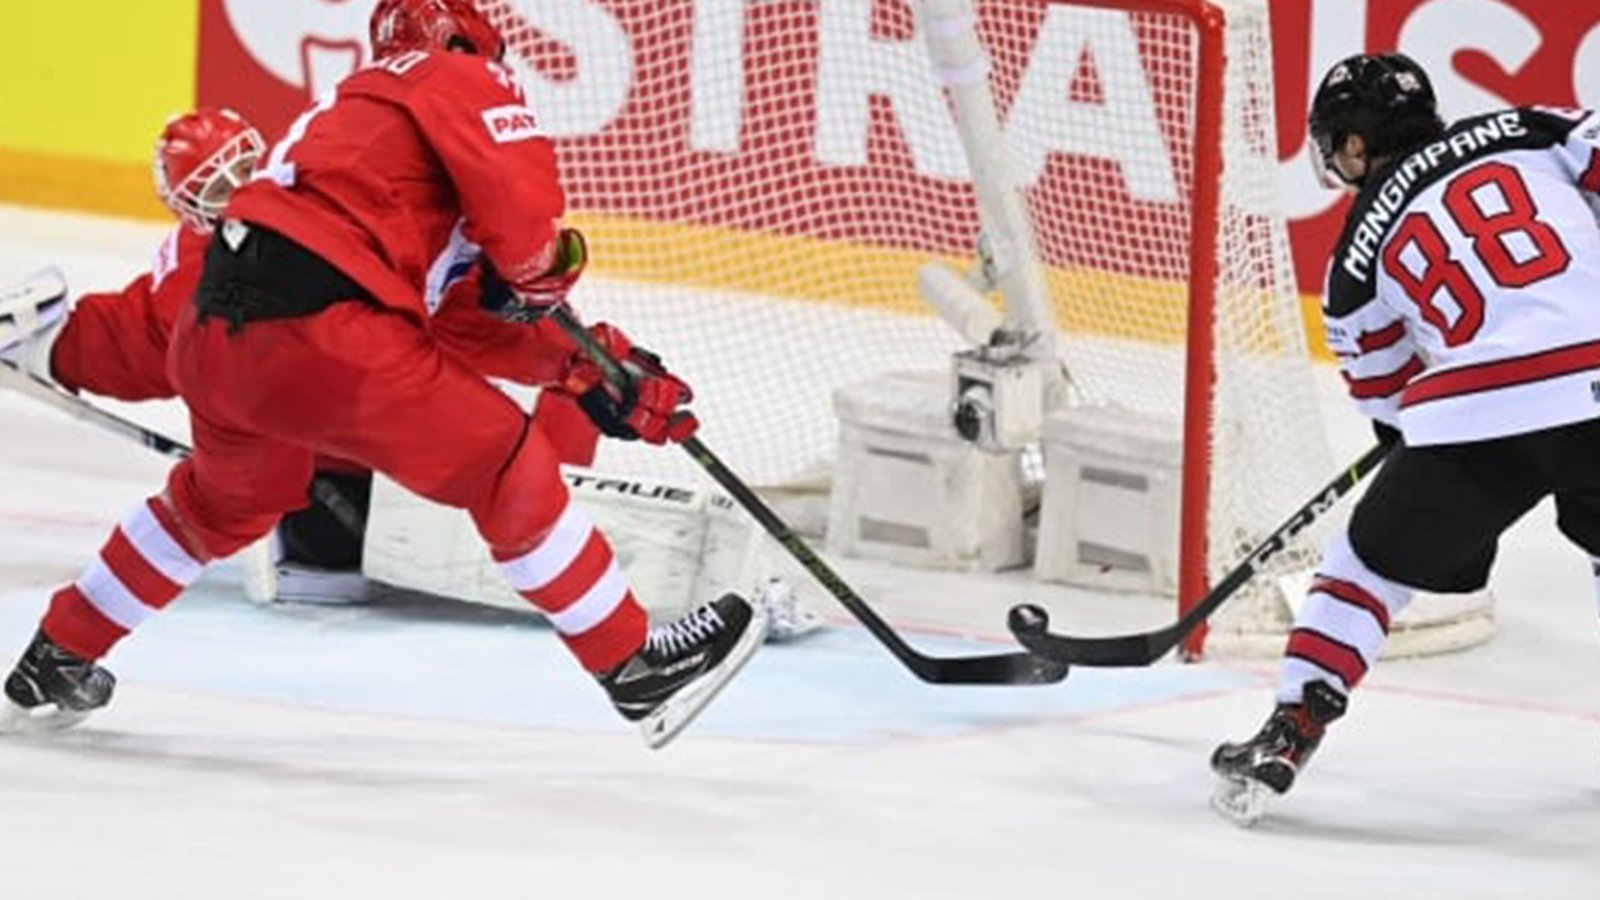 Team Canada wins an OT thriller over Russia to advance in the IIHF World Championship